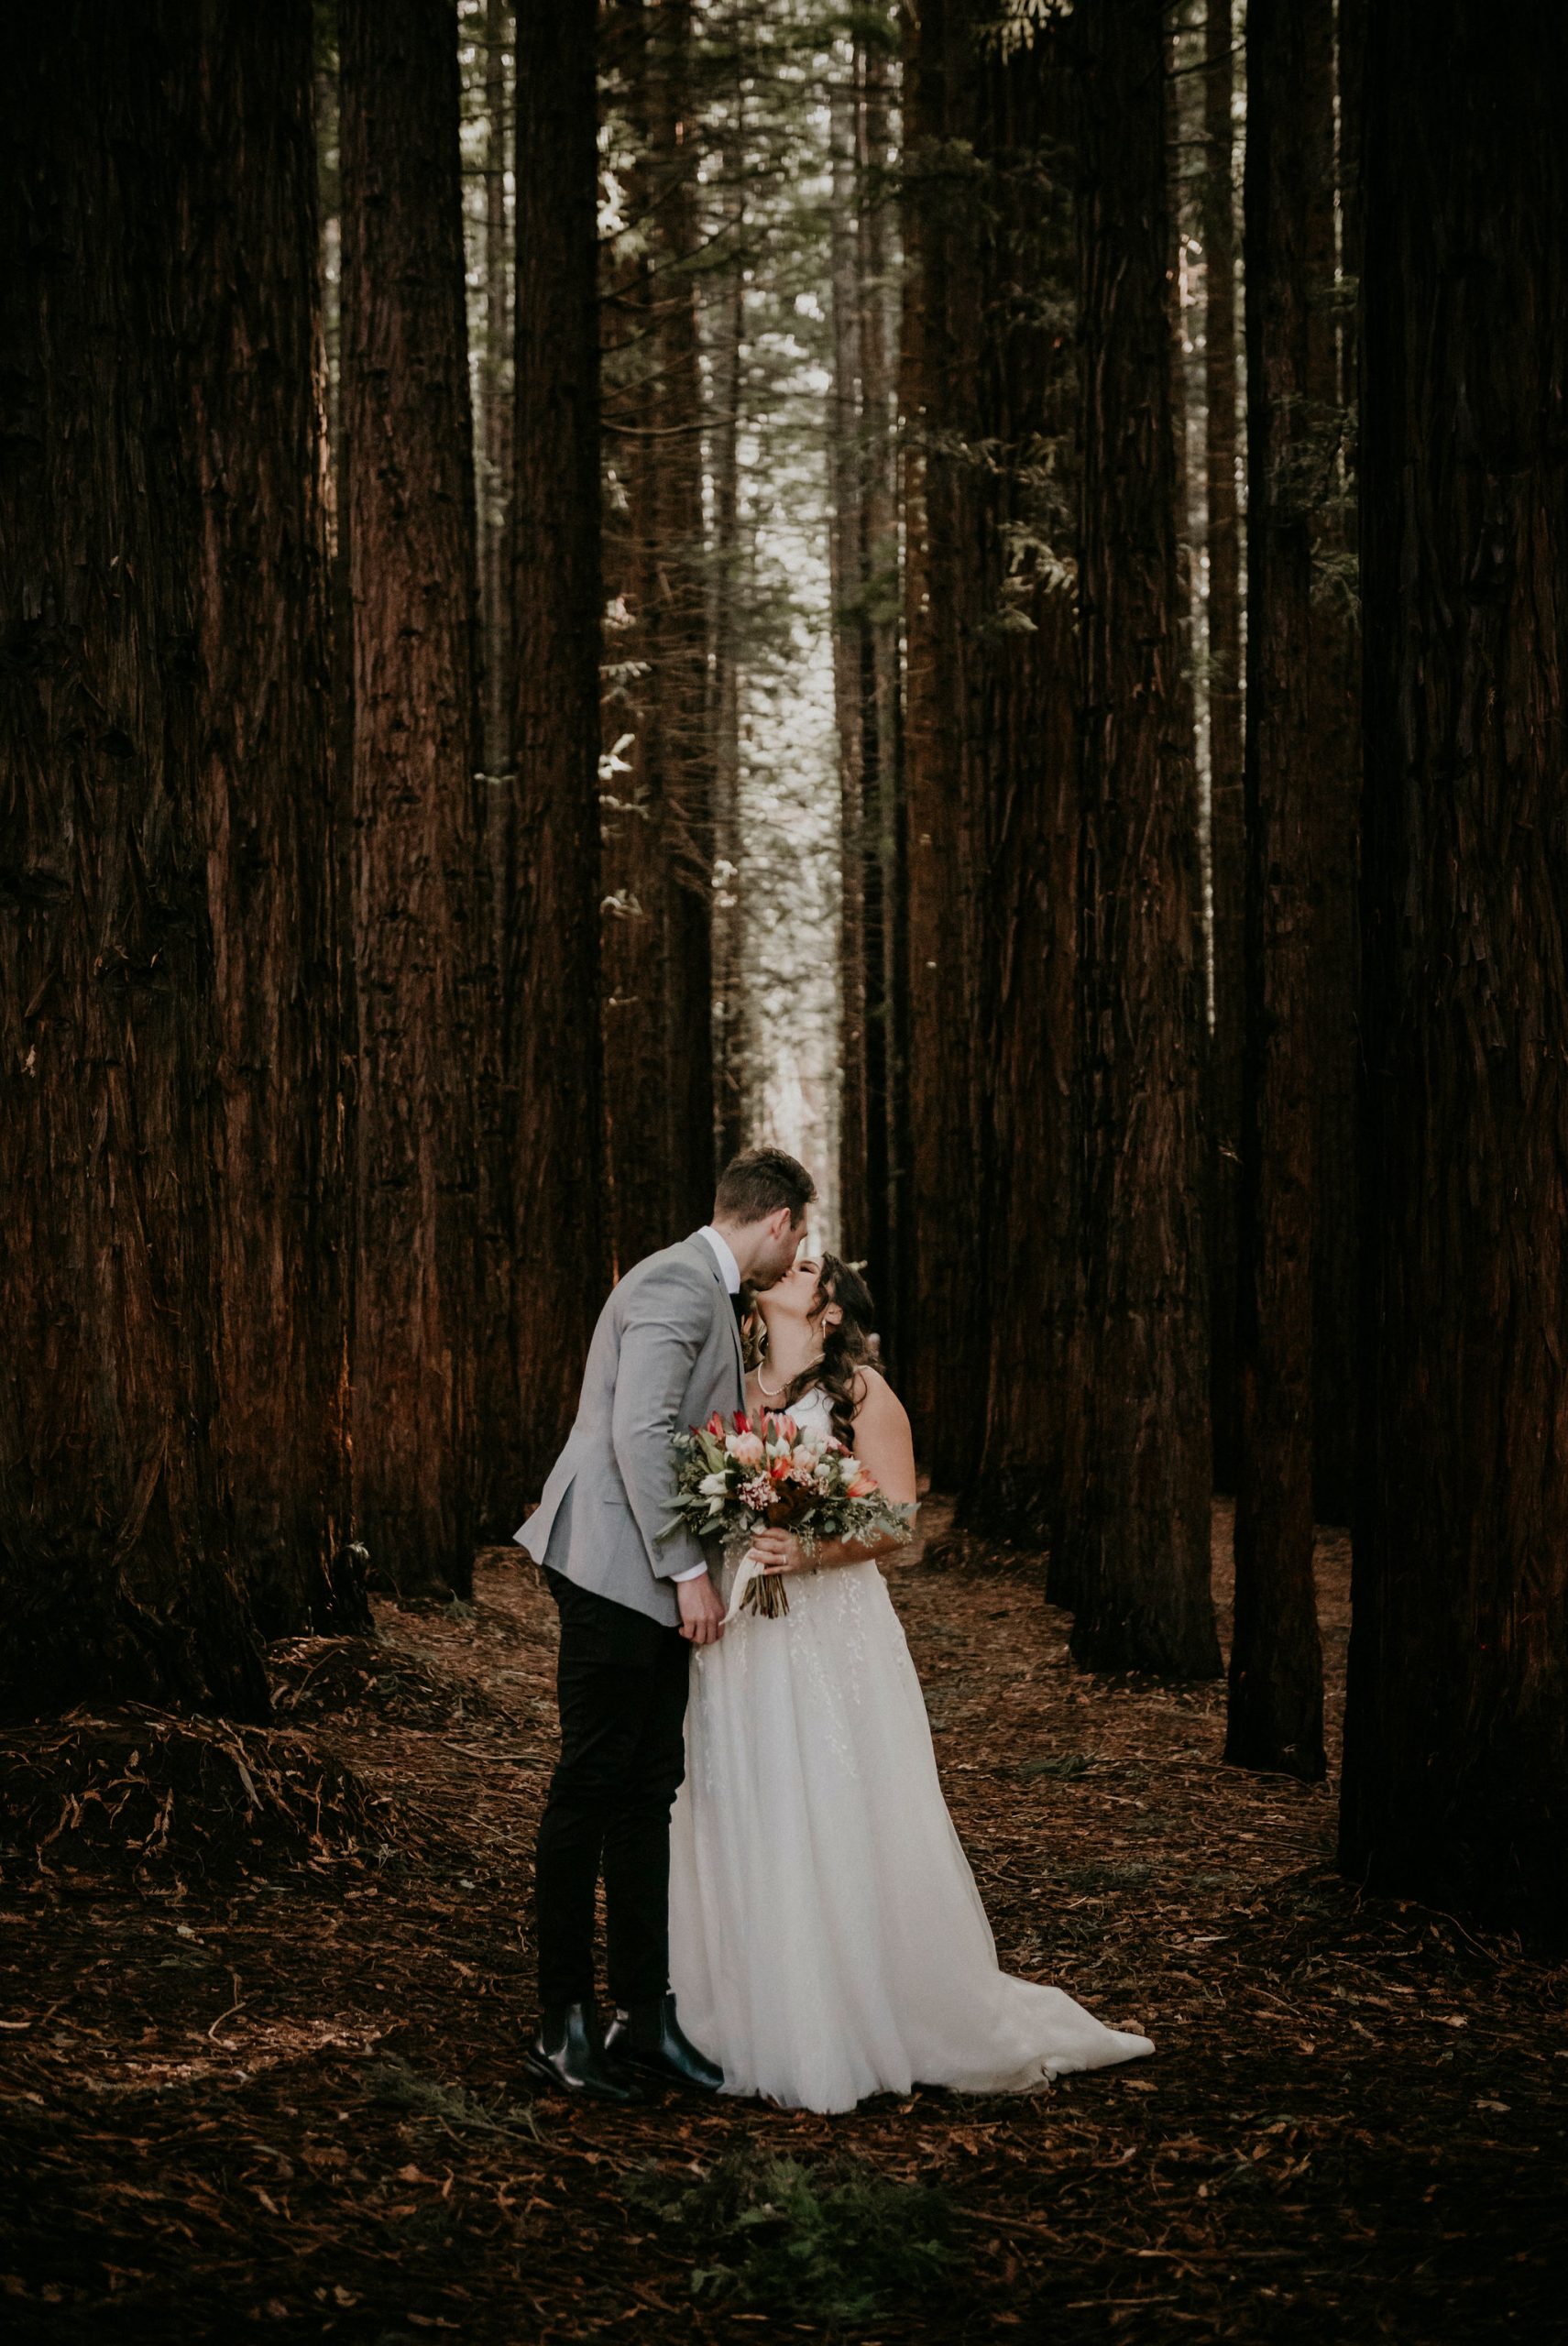 Lets-Elope-Melbourne-Celebrant-Photographer-Elopement-Package-Victoria-Sarah-Matler-Photography-Videography-Video-Warburton-Redwood-Forest-weddings-intimate-9